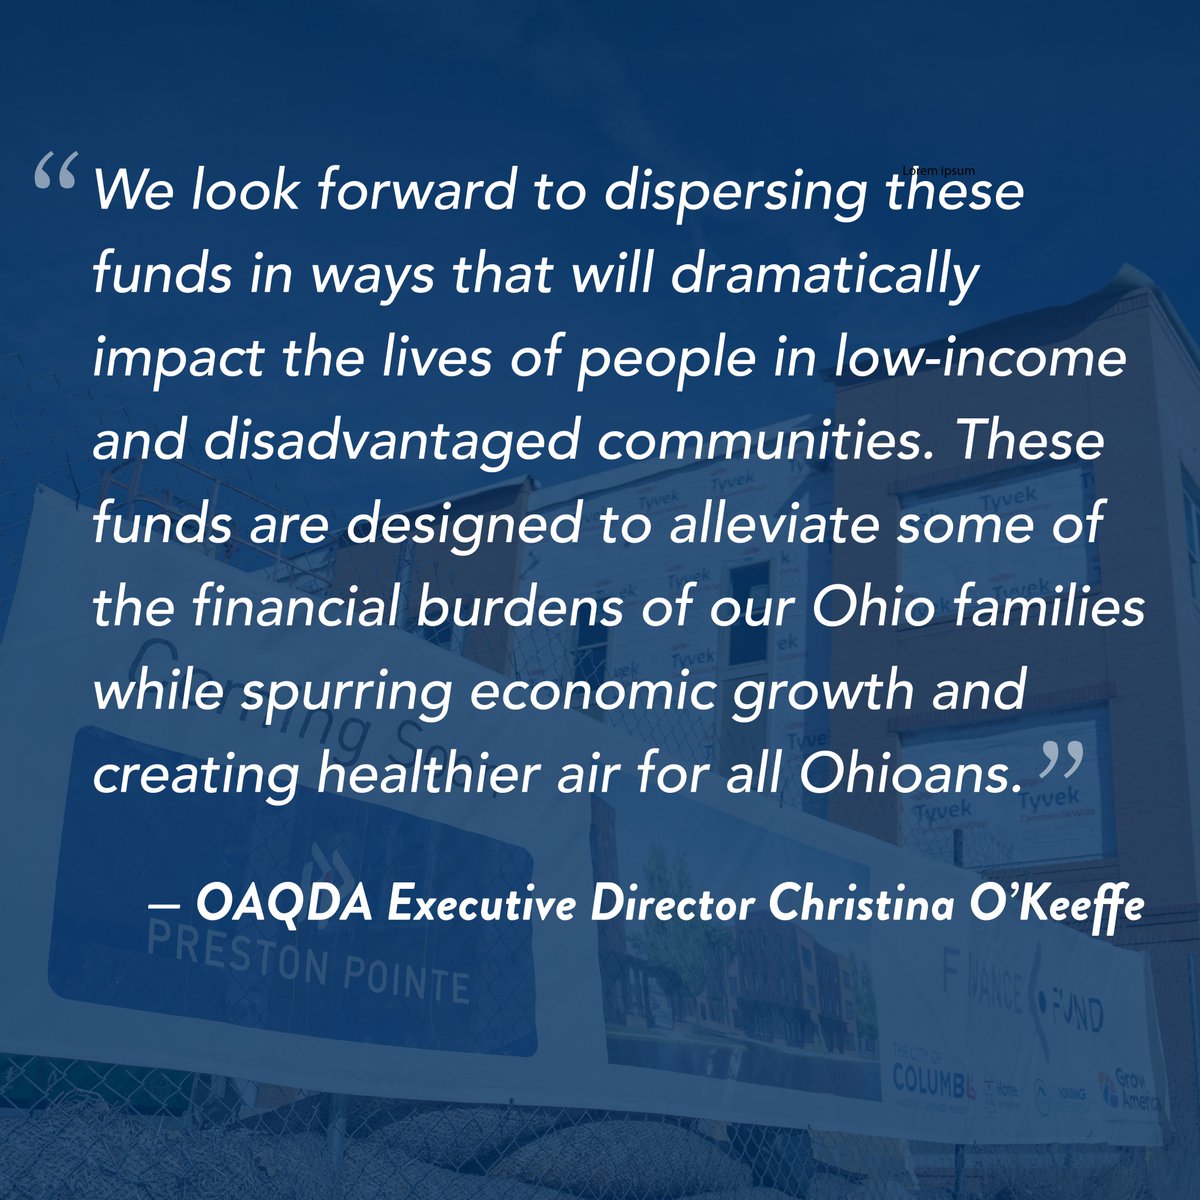 On this #EarthDay, OAQDA, along with our partners at the @OhioEPA, are thrilled to announce for Ohio a new $156 million program for supporting residential solar energy development in underserved communities. bit.ly/3xUTsw8